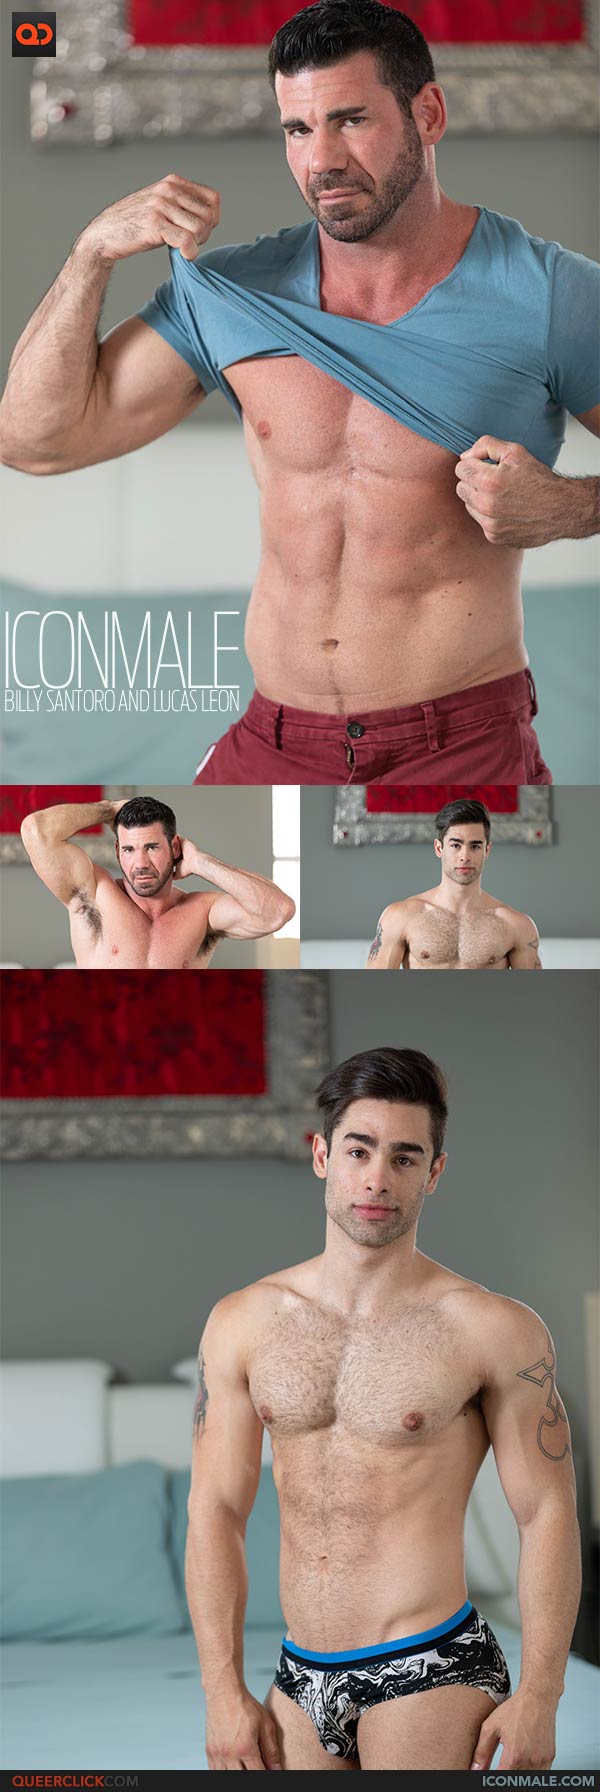 IconMale: Billy Santoro and Lucas Leon